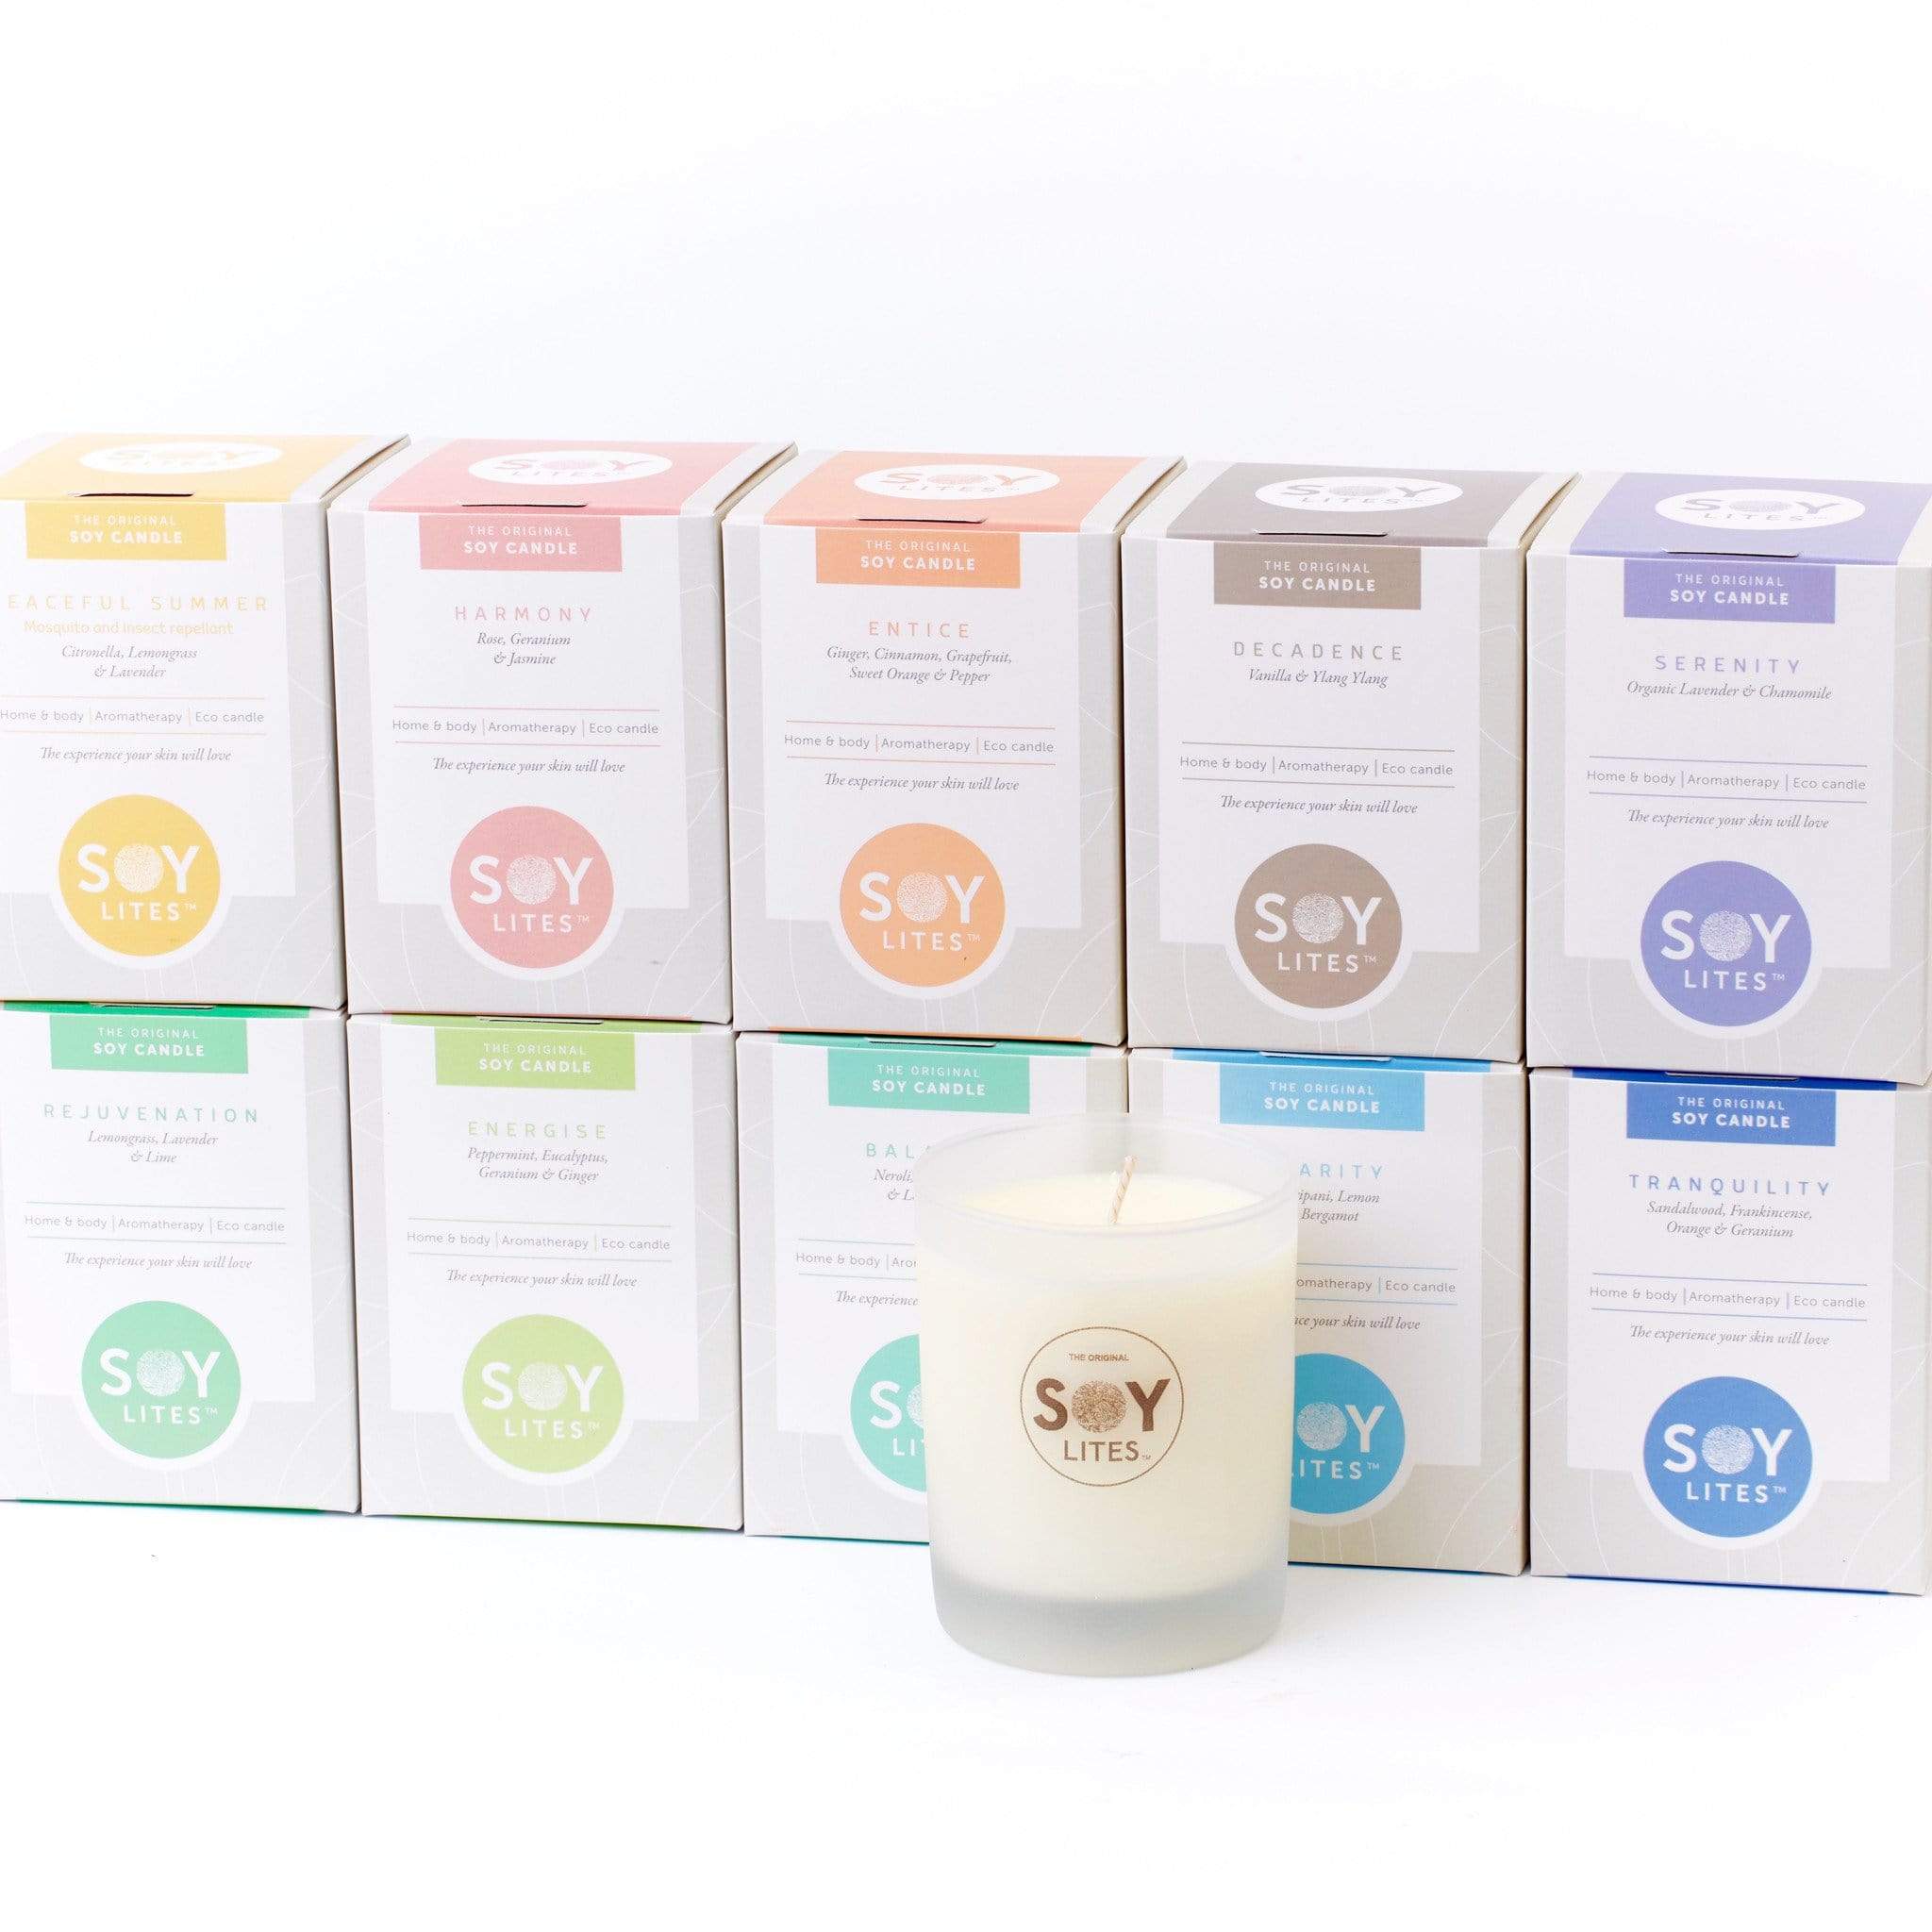 Burn Bright value pack 12 x 220ml aromatherapy tumbler candles great soy candle gift option